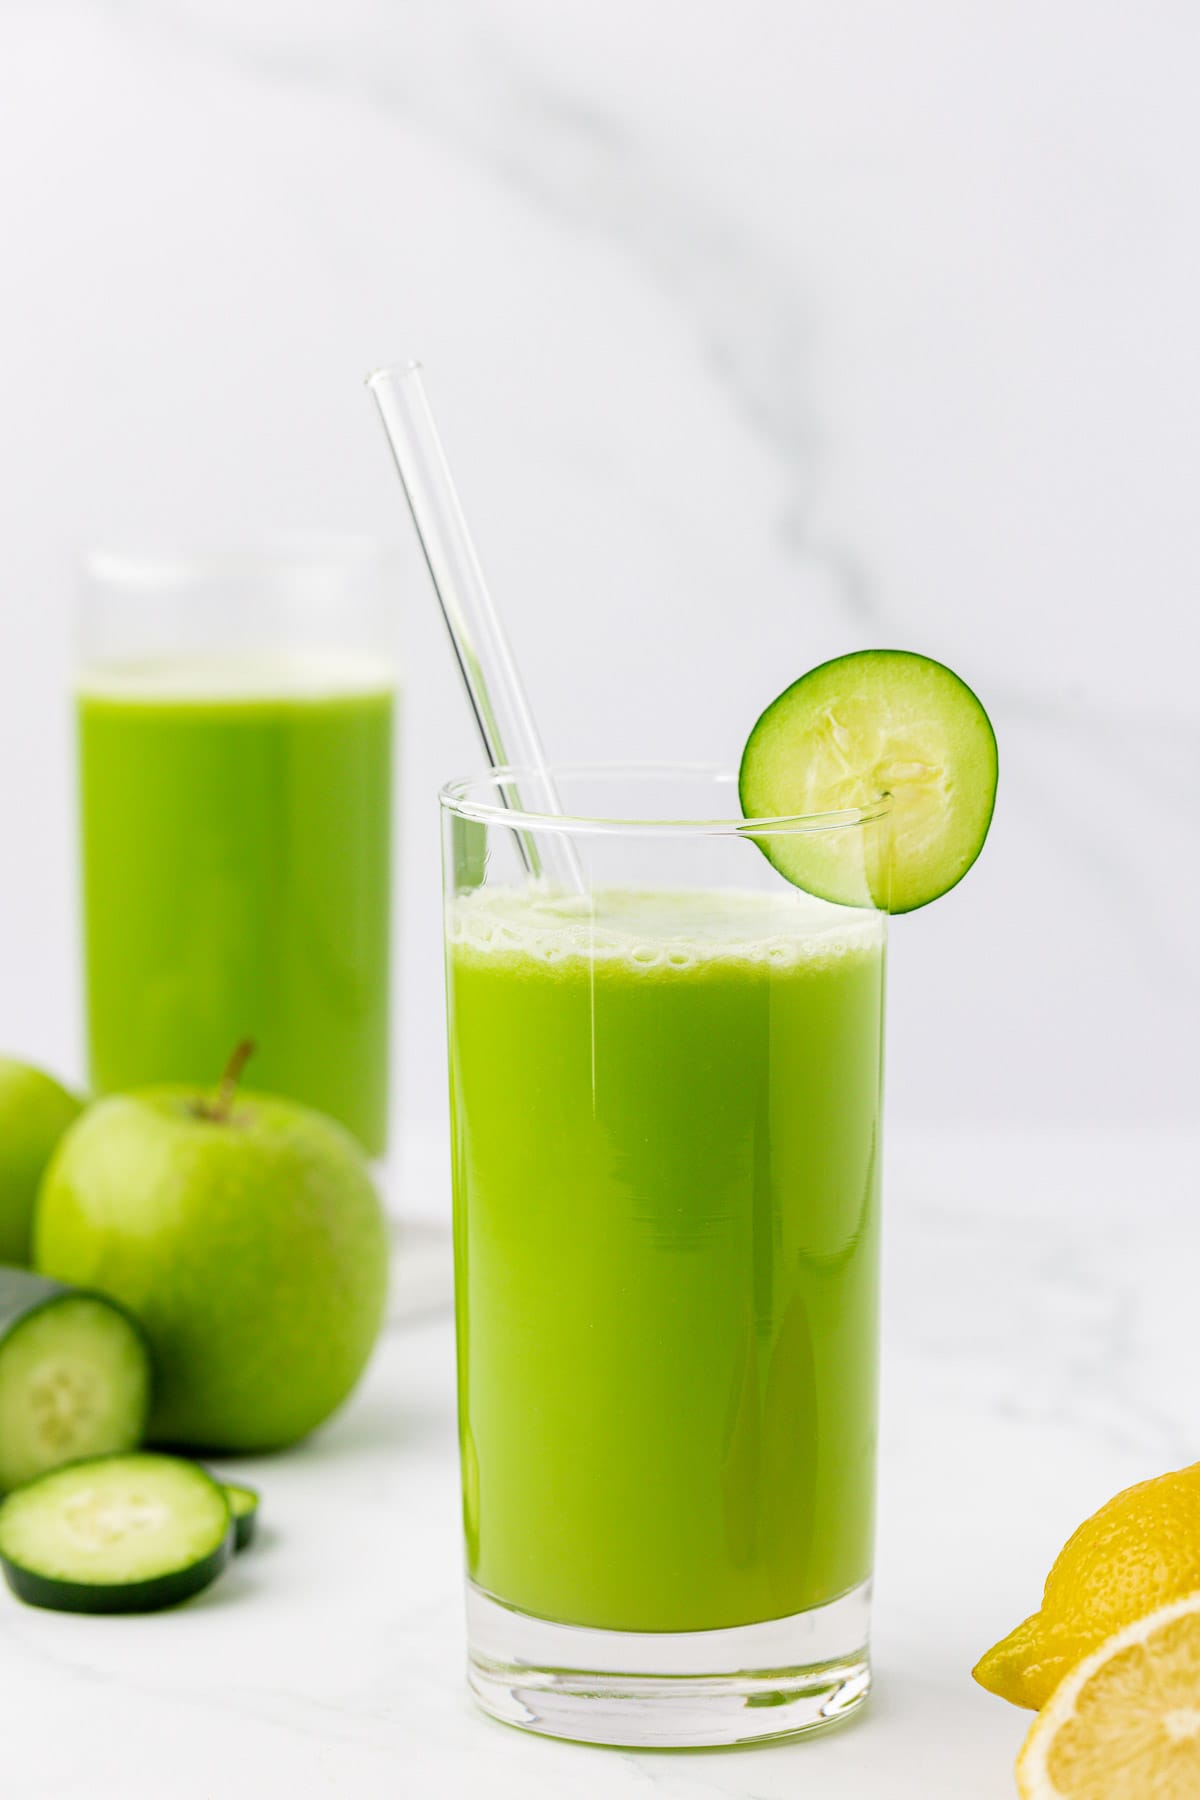 juice in a glass with a cucumber slice on the rim